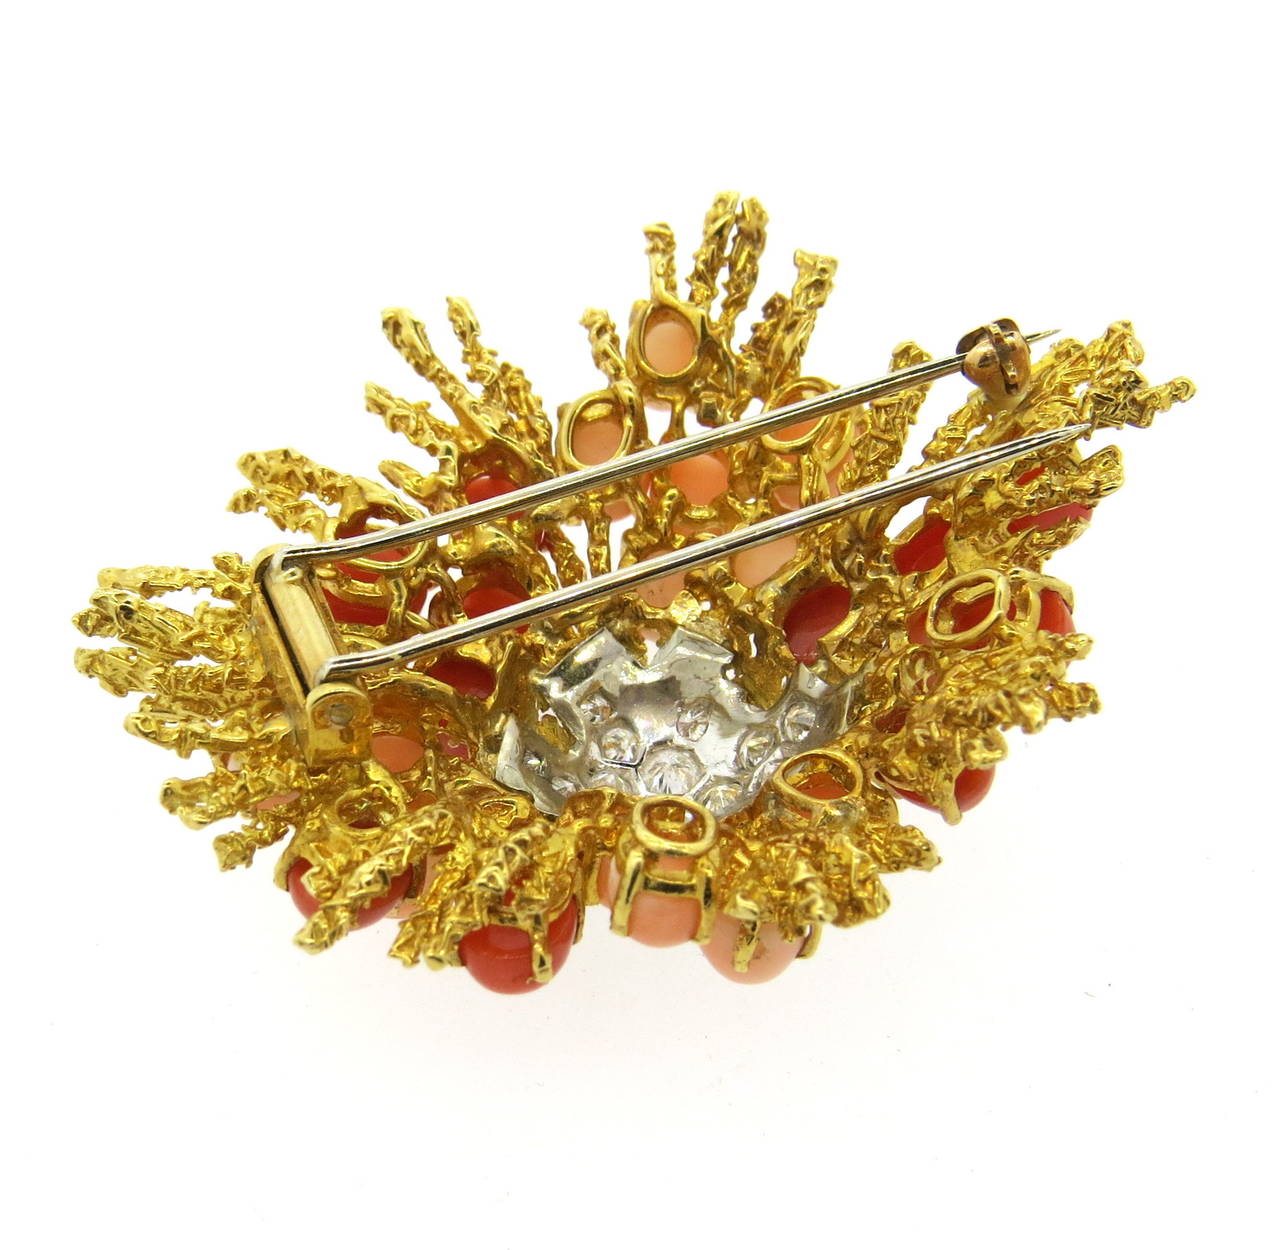 1970s 18k gold brooch, featuring red and angel skin coral cabochons, decorated with approximately 0.80ctw in diamonds in the center. Brooch measures 49mm x 50mm. Weight of the piece - 32.3 grams